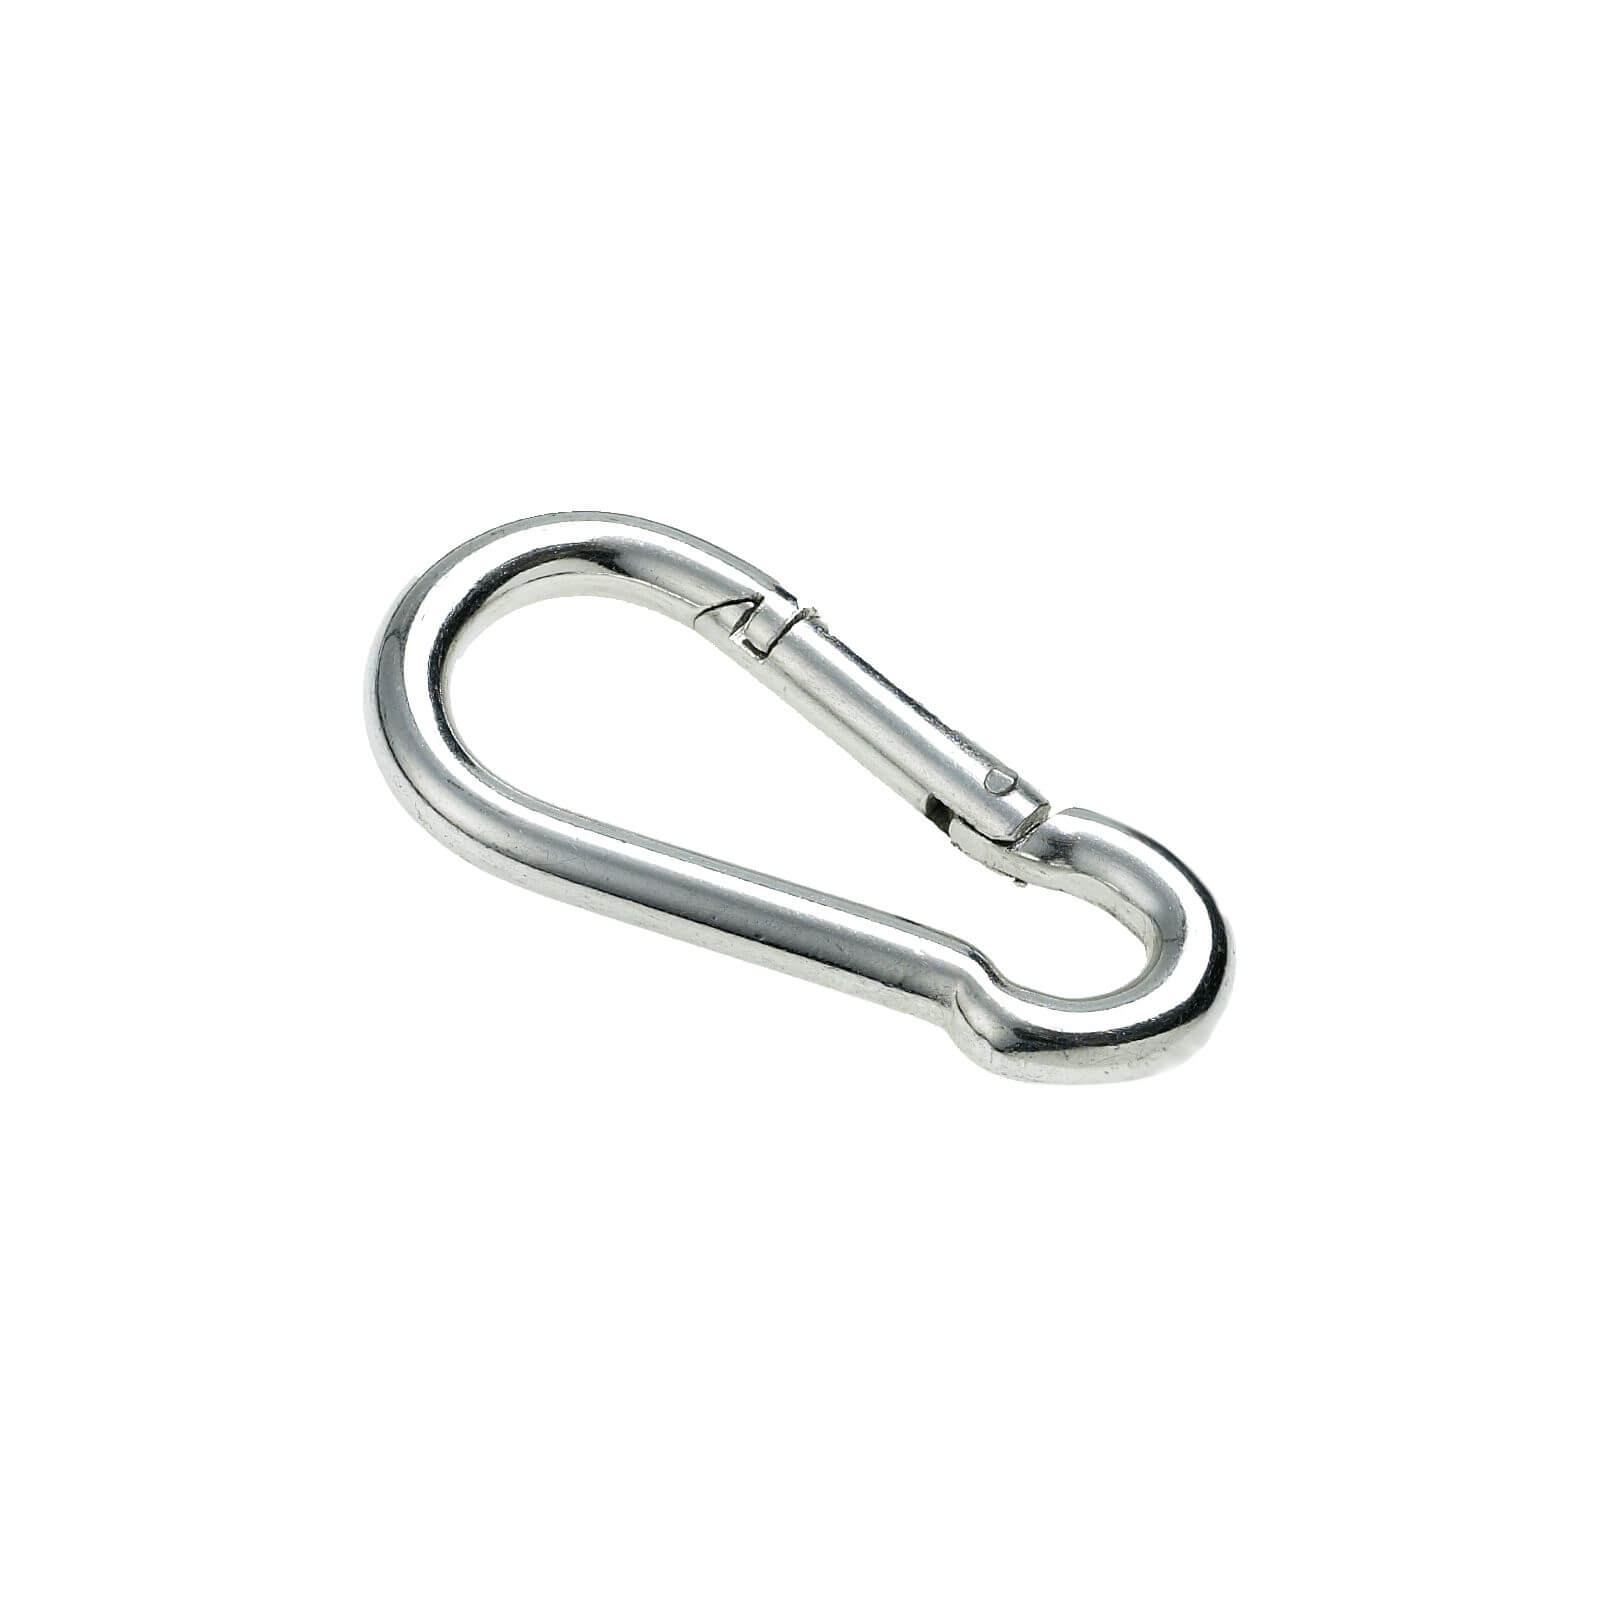 Quick Release Hook - 90mm - 2 Pack